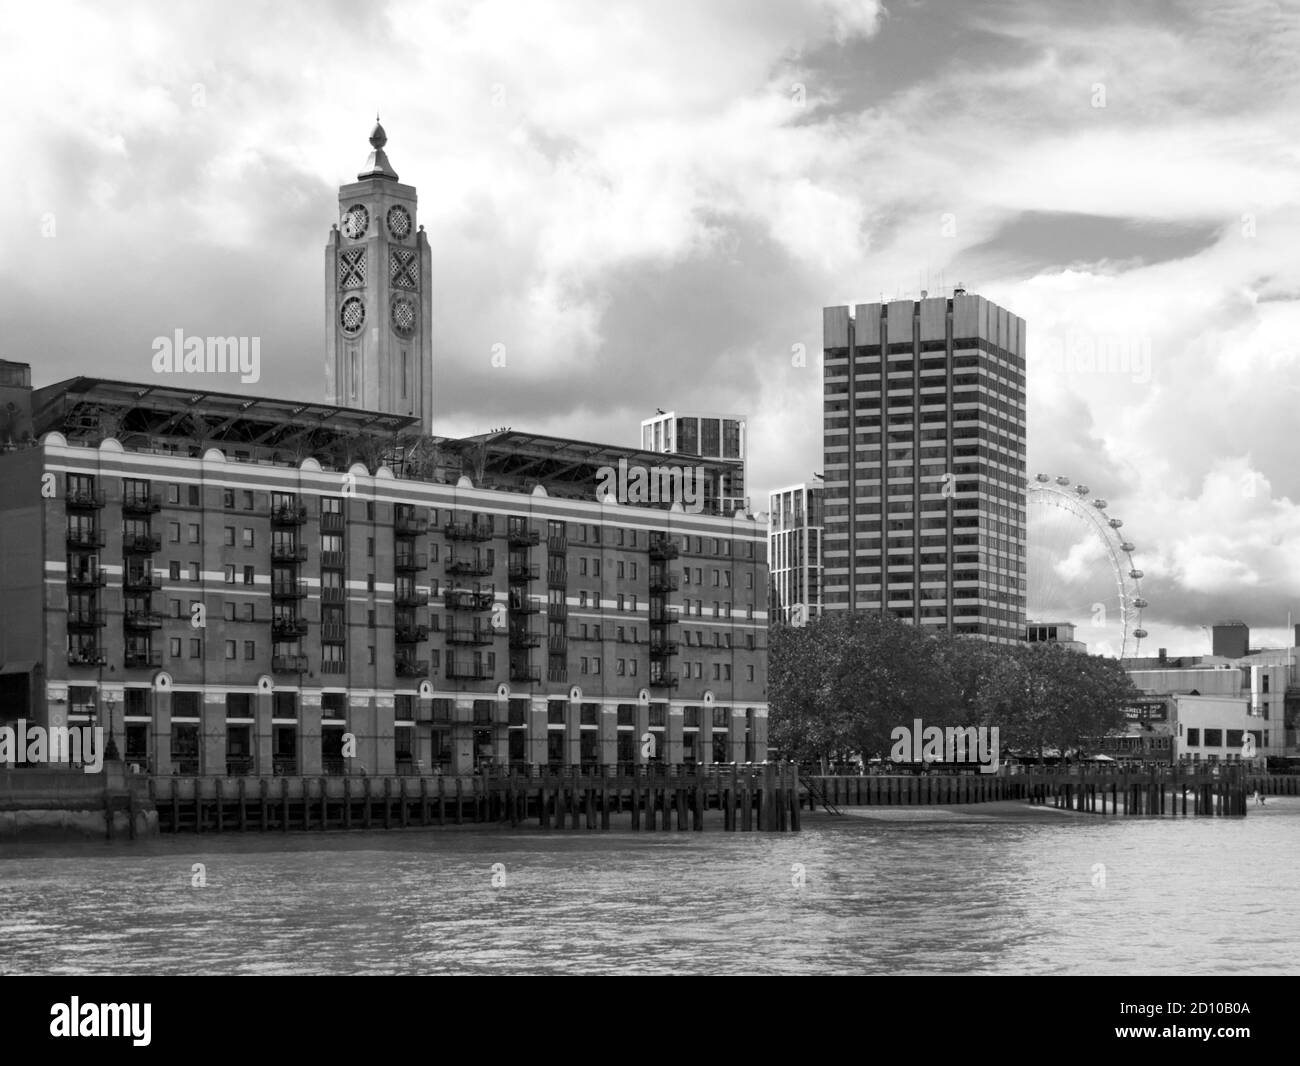 Oxo Tower Wharf, One Blackfriars on Londons River Thames Embankment, Borough of Southwark.Sea Containers Building. Die Vase und der Shard. Art Déco. Stockfoto